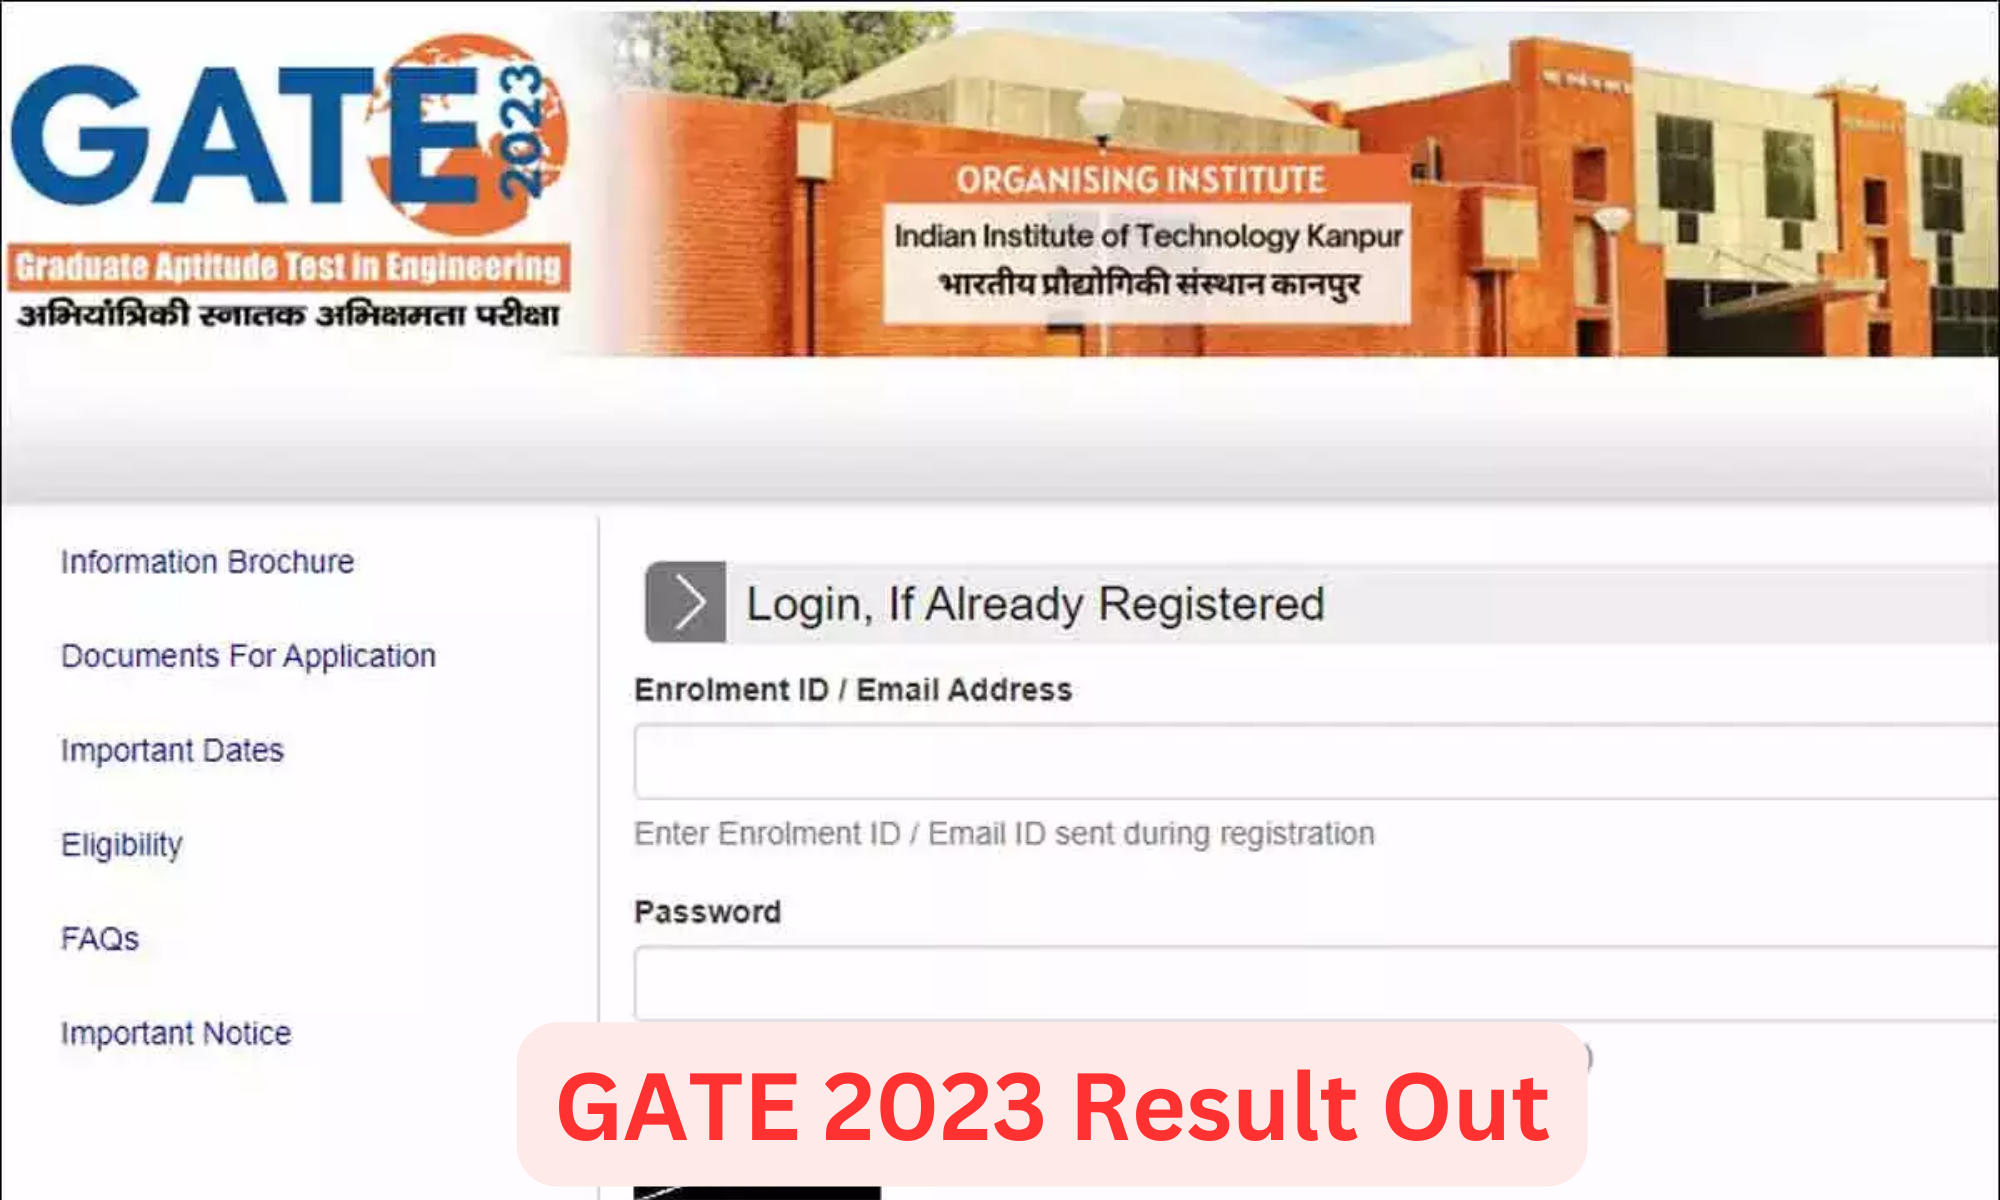 GATE 2023 Result Out